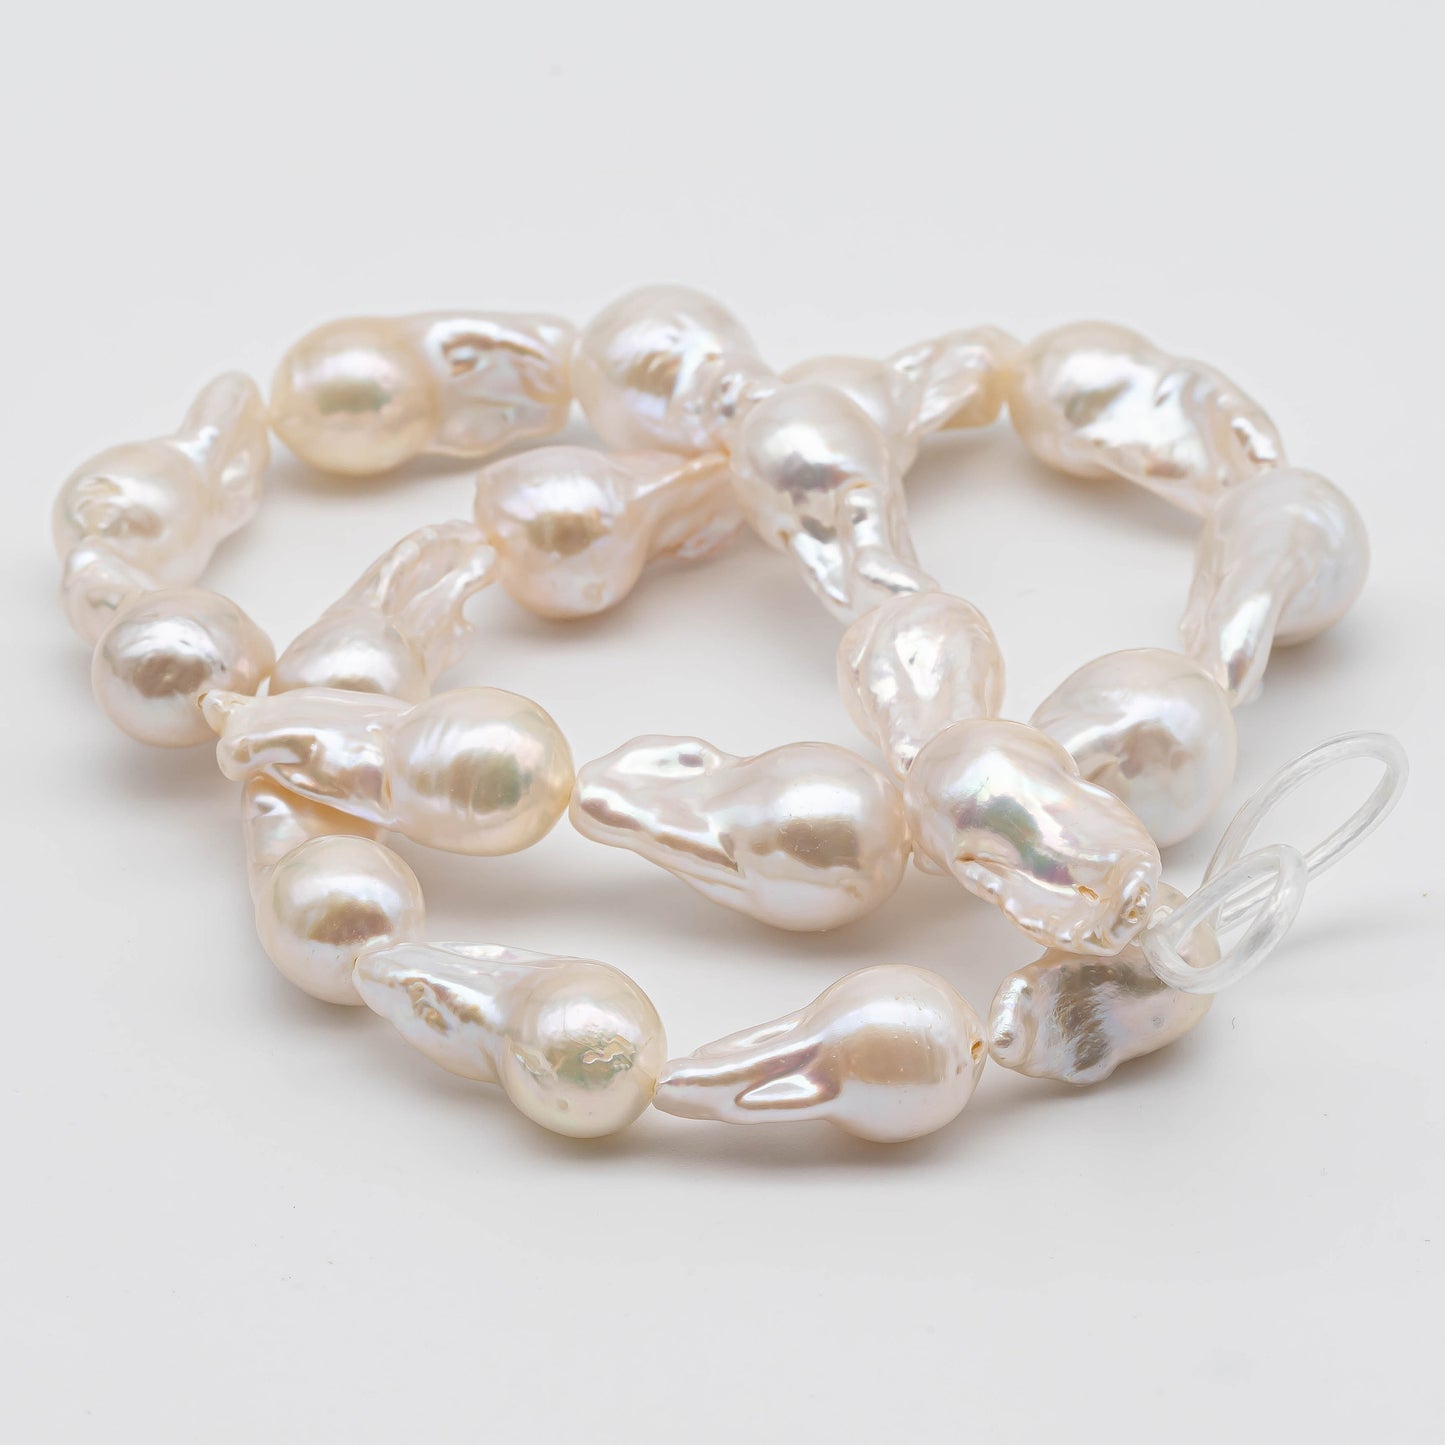 10-12mm Baroque Pearl Small Size Elongate Flameball Pearl Beads with Beautiful Luster, Difficult to Find Pieces, Full Strand, SKU# 1114BA